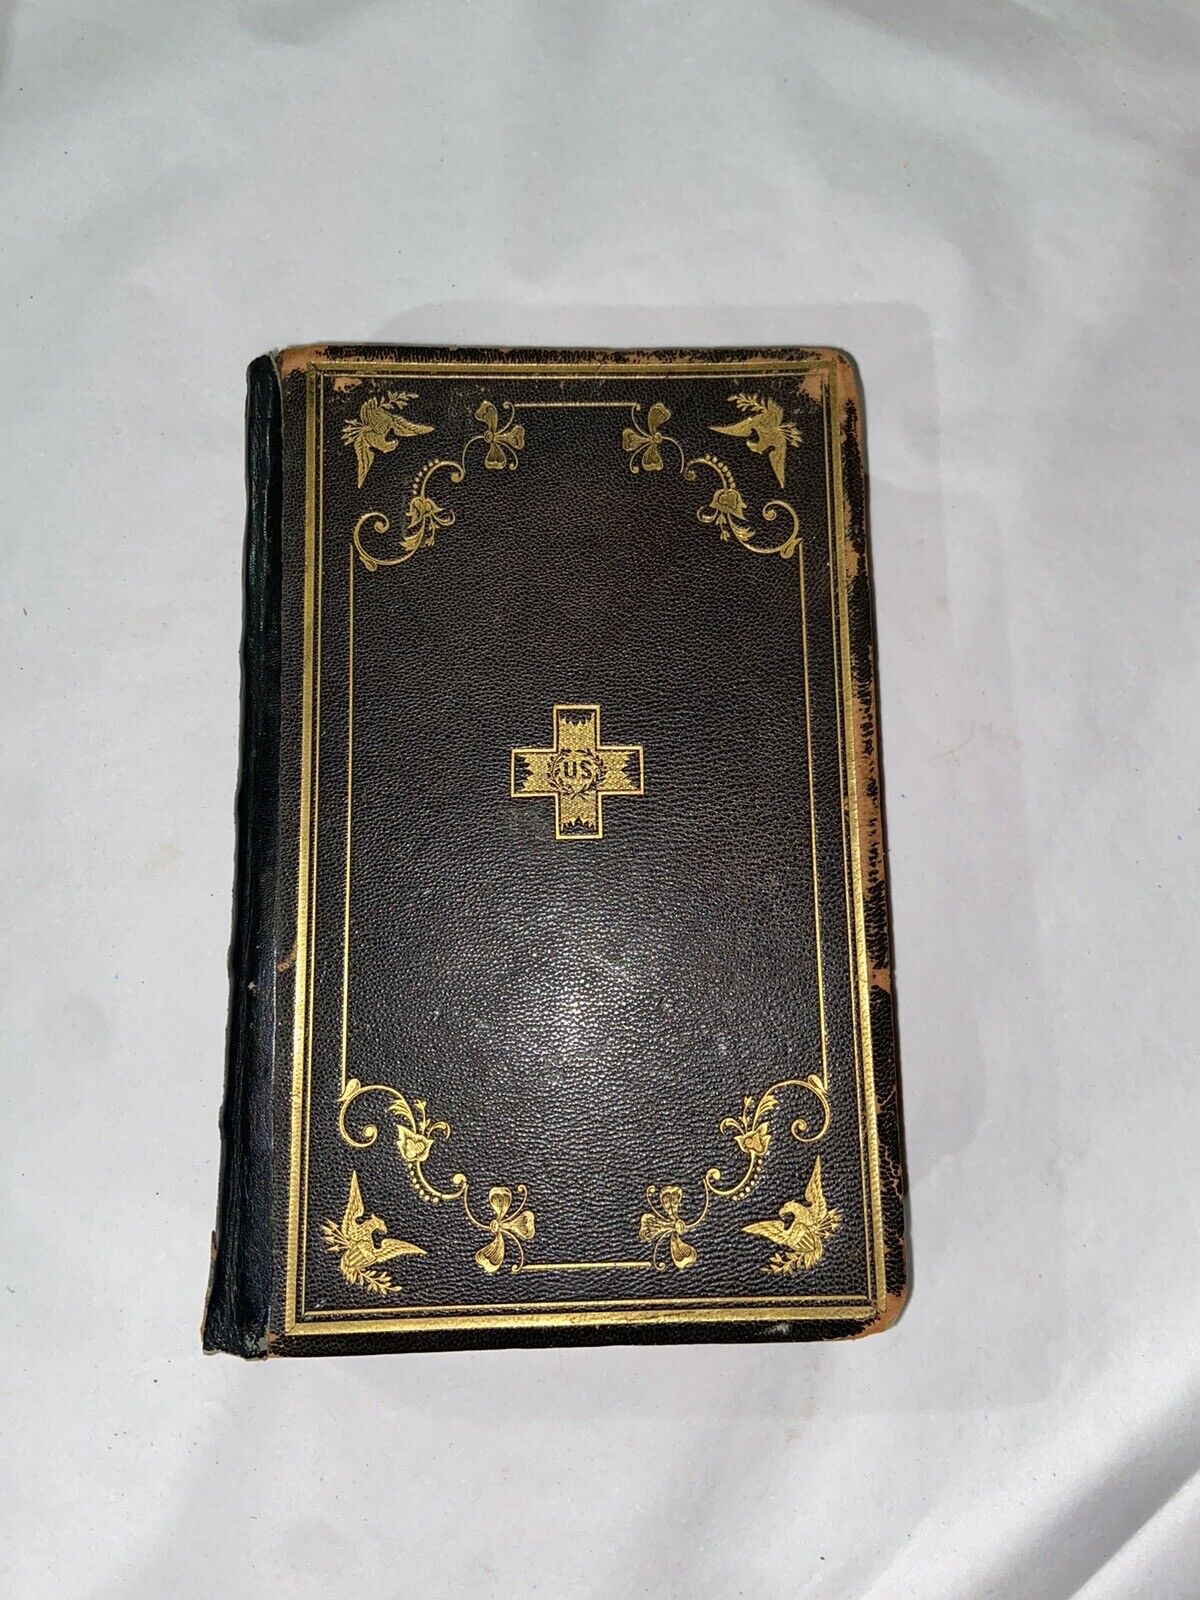 1866 Exceptionally Rare Book - “Three Years In The Sixth Corps” - First Edition